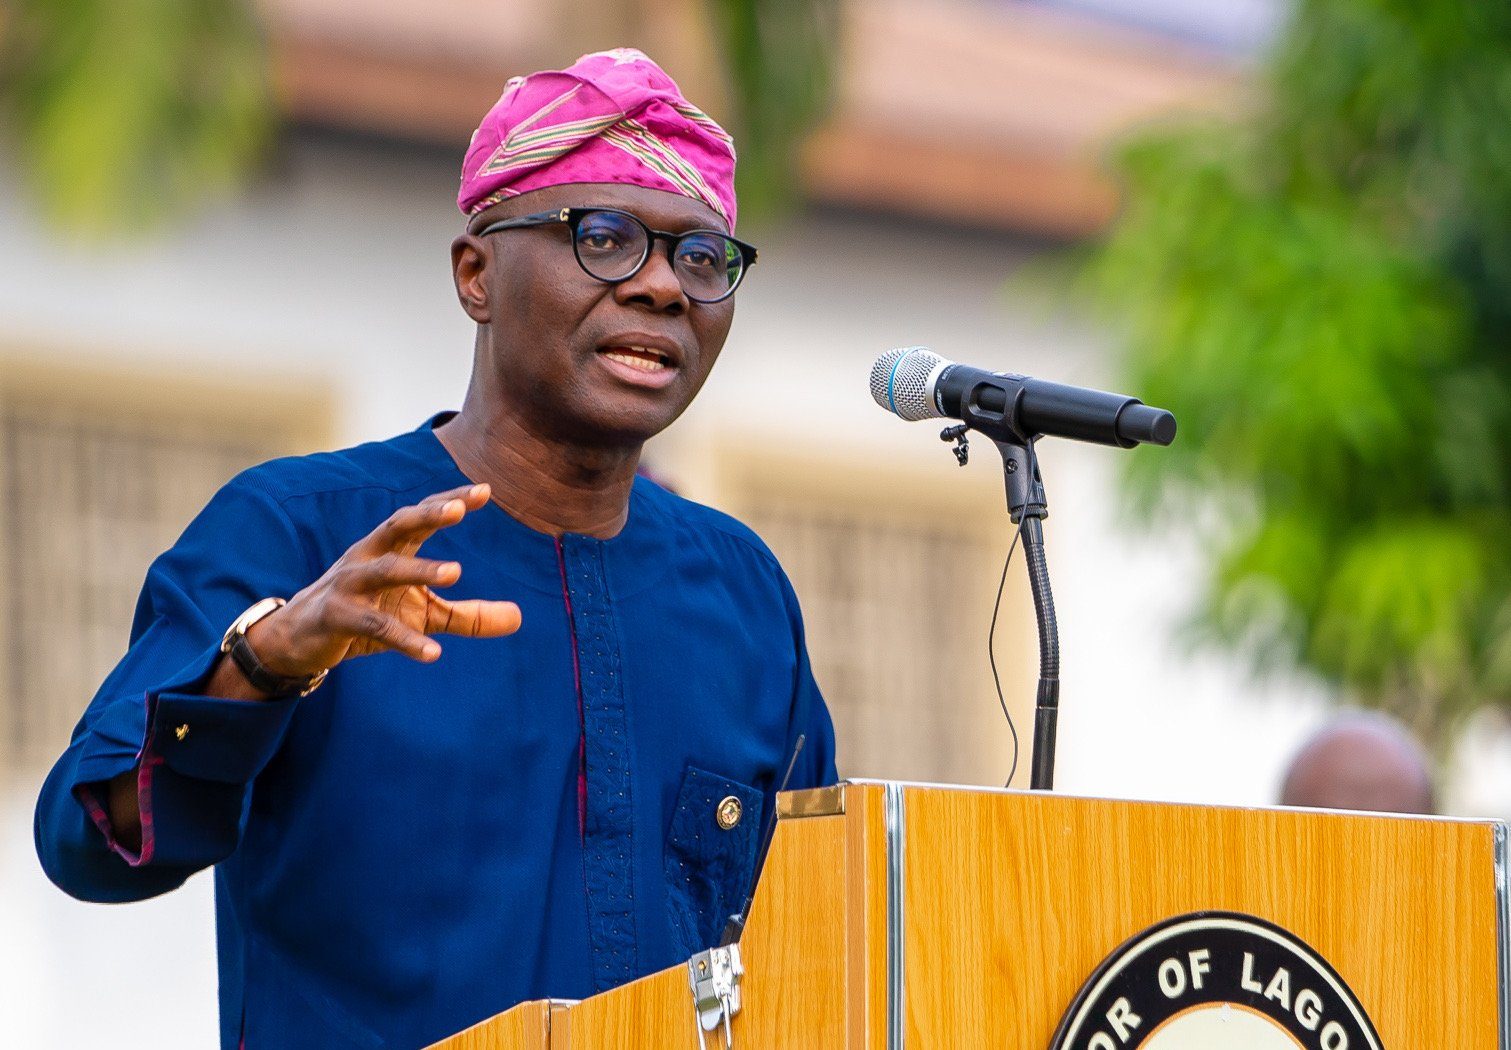 Governor Sanwo-Olu Assigns Portfolio To Newly Sworn-in Commissioners, Special Advisers In Lagos (Full List)